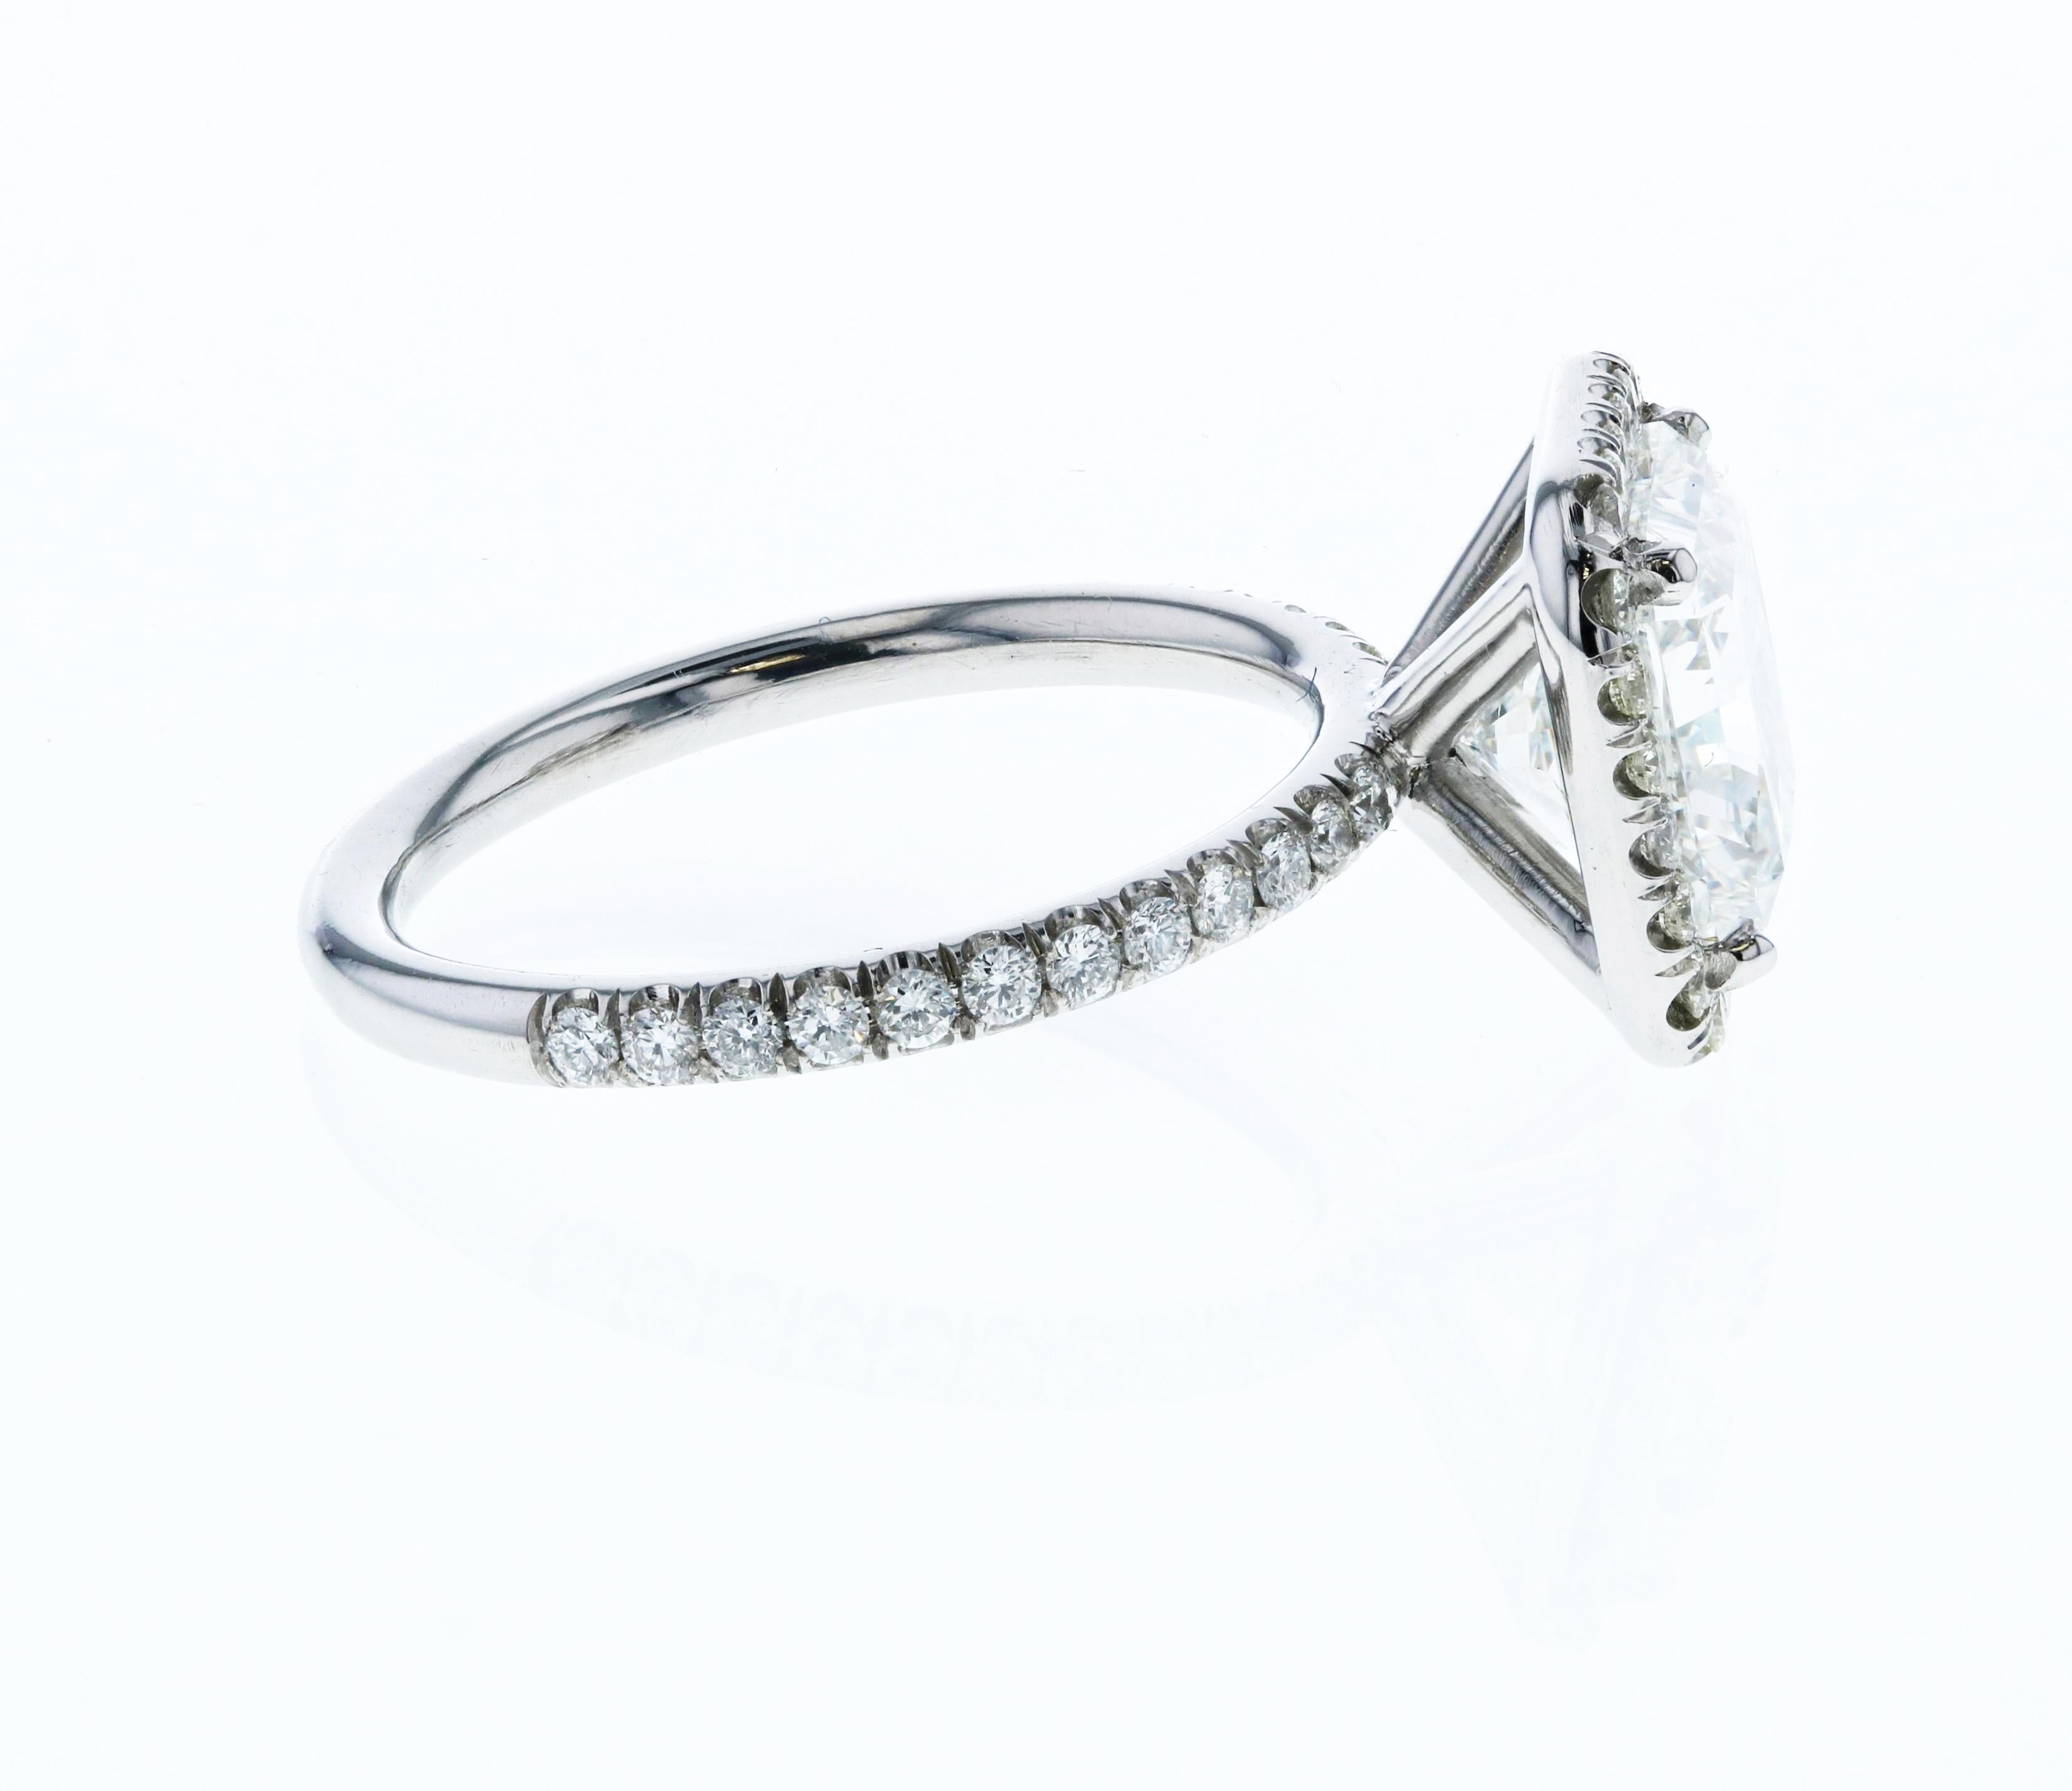 One of the more luxurious cuts of diamonds are radiant cuts. Radiants can be more elongated or square and straddle the edge between being a cushion shape and a princess cut. Radiant cuts combine the best of both worlds. 

This gorgeous 3.01 carat